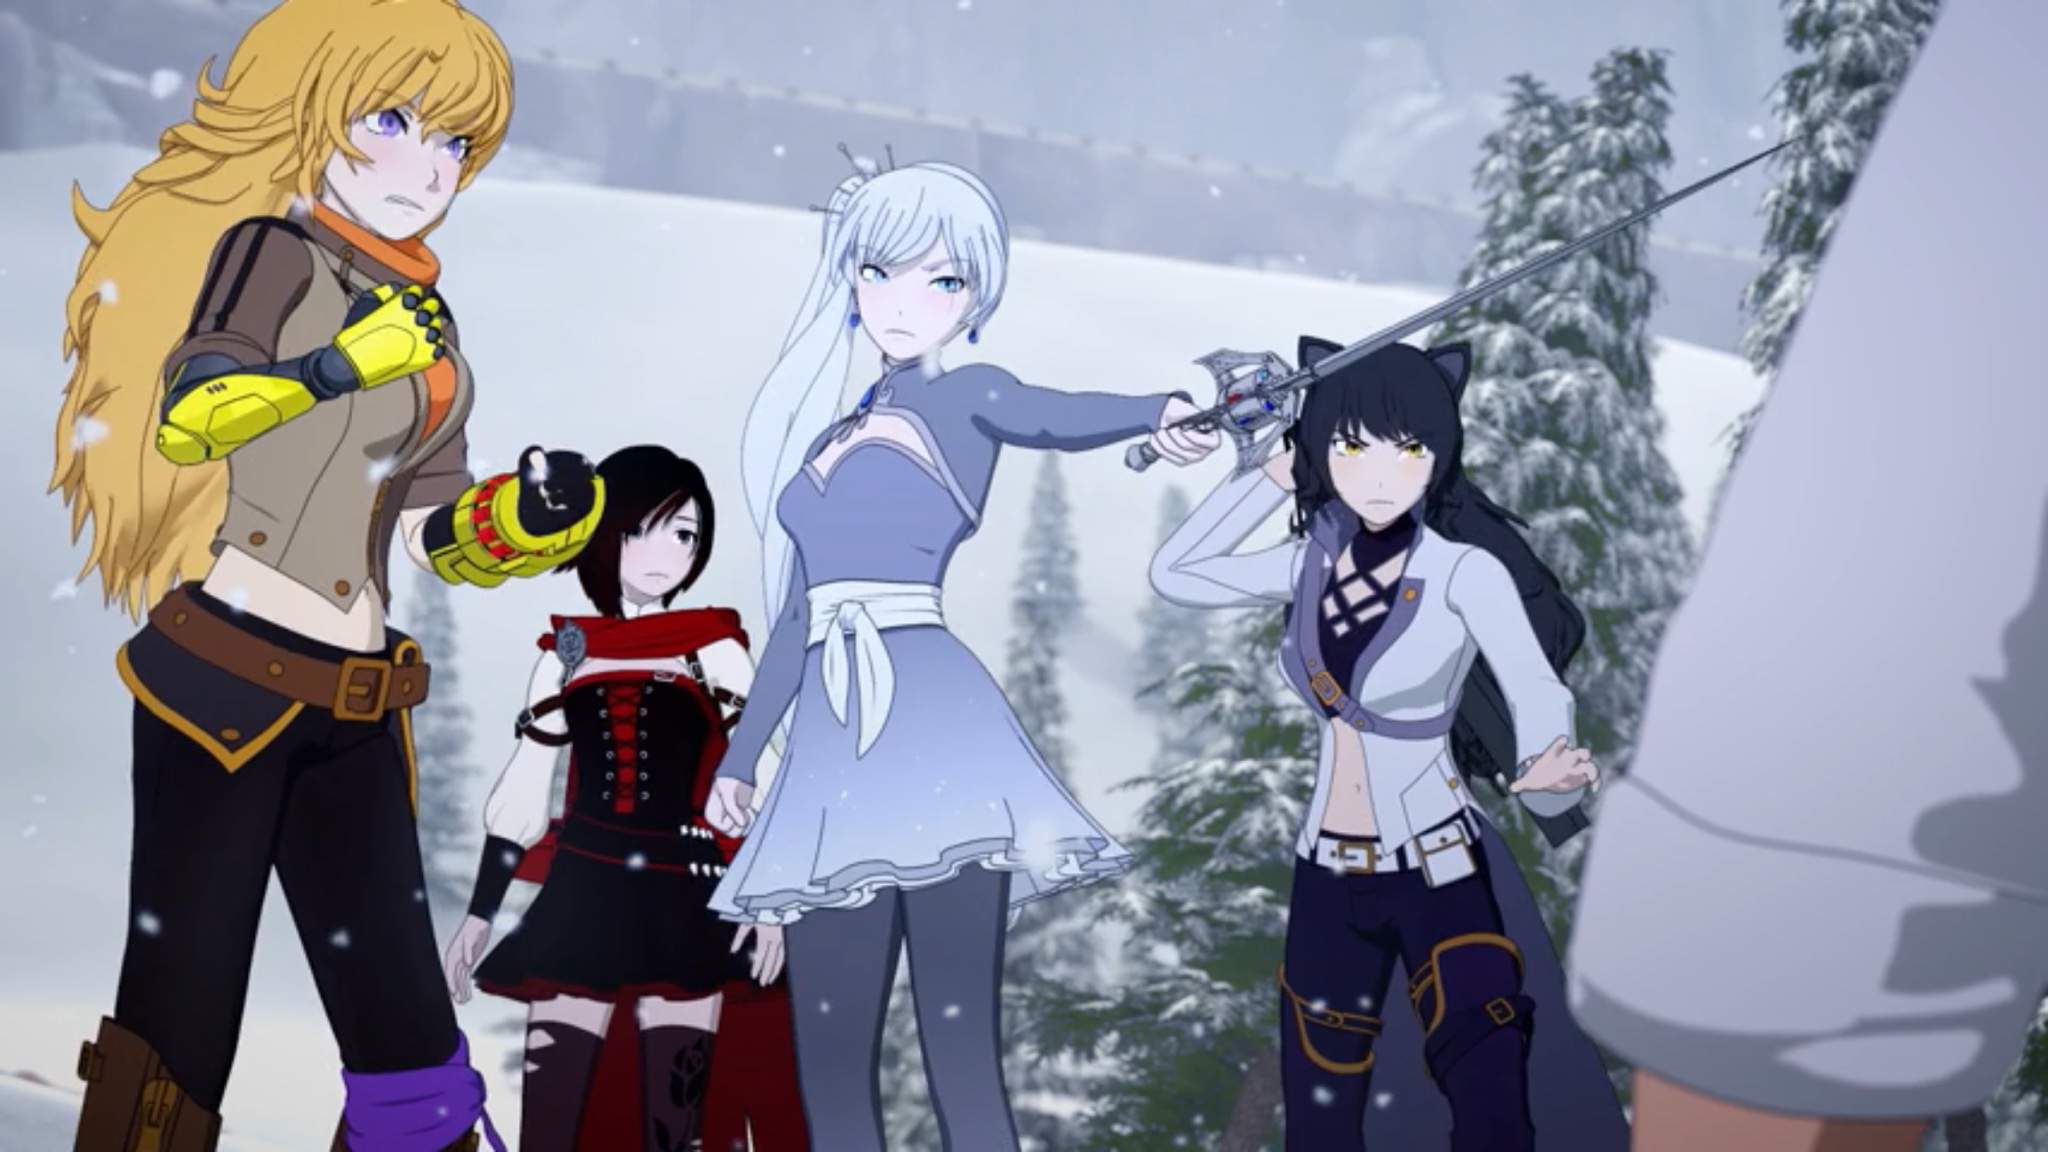 Quick Question About Weiss, Blake, and Yang RWBY Amino.